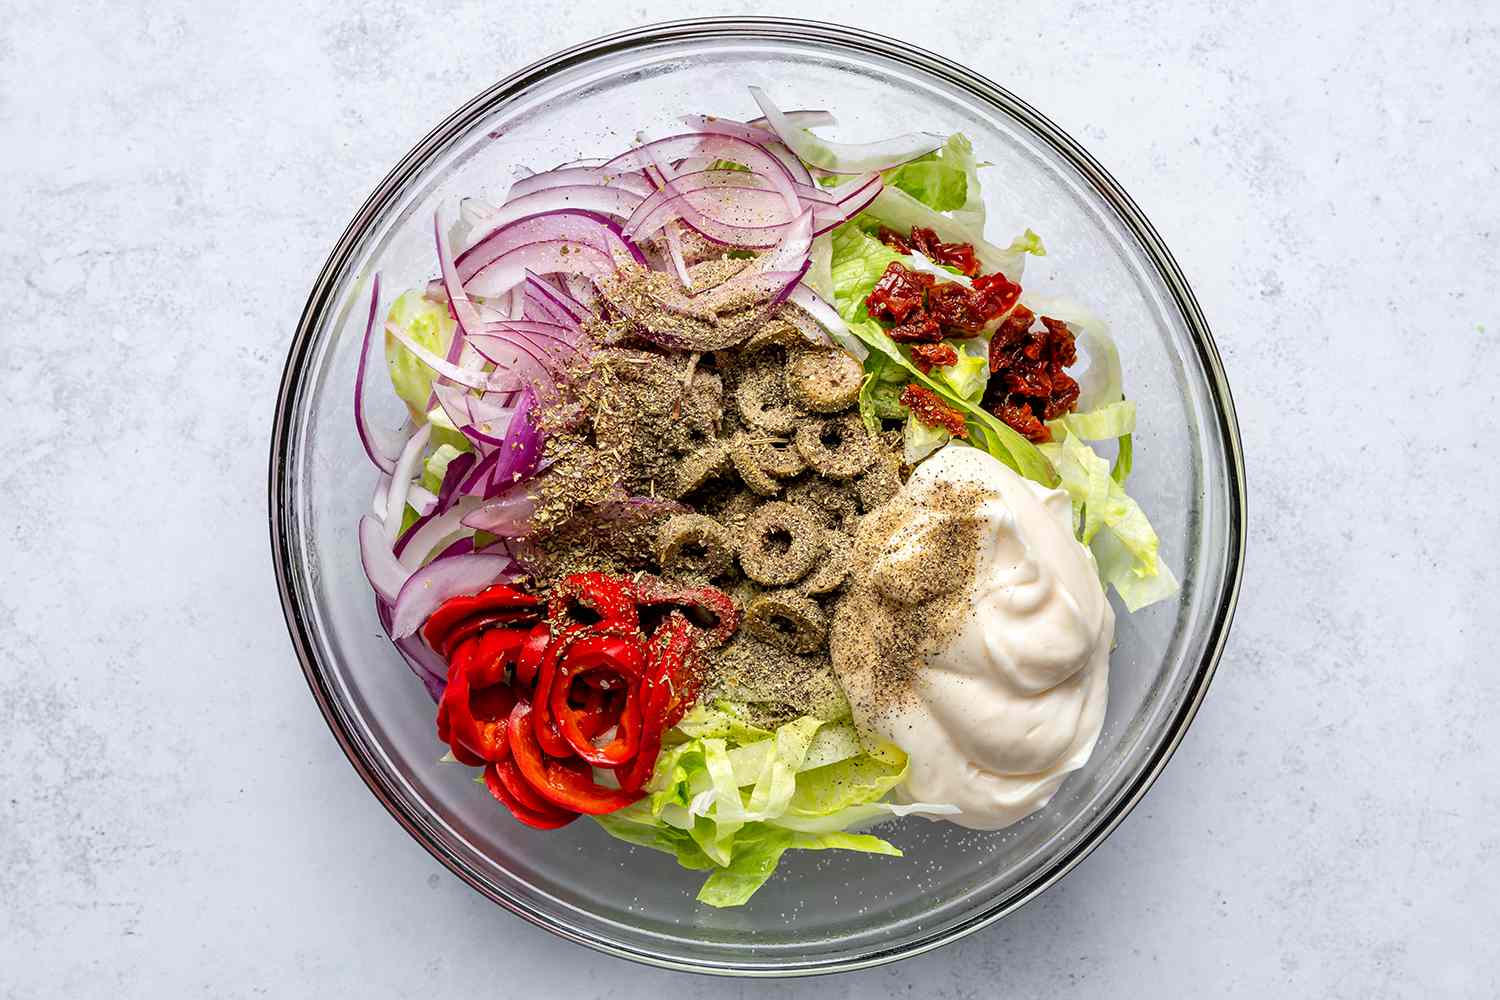 Salad topping for sandwiches in a bowl